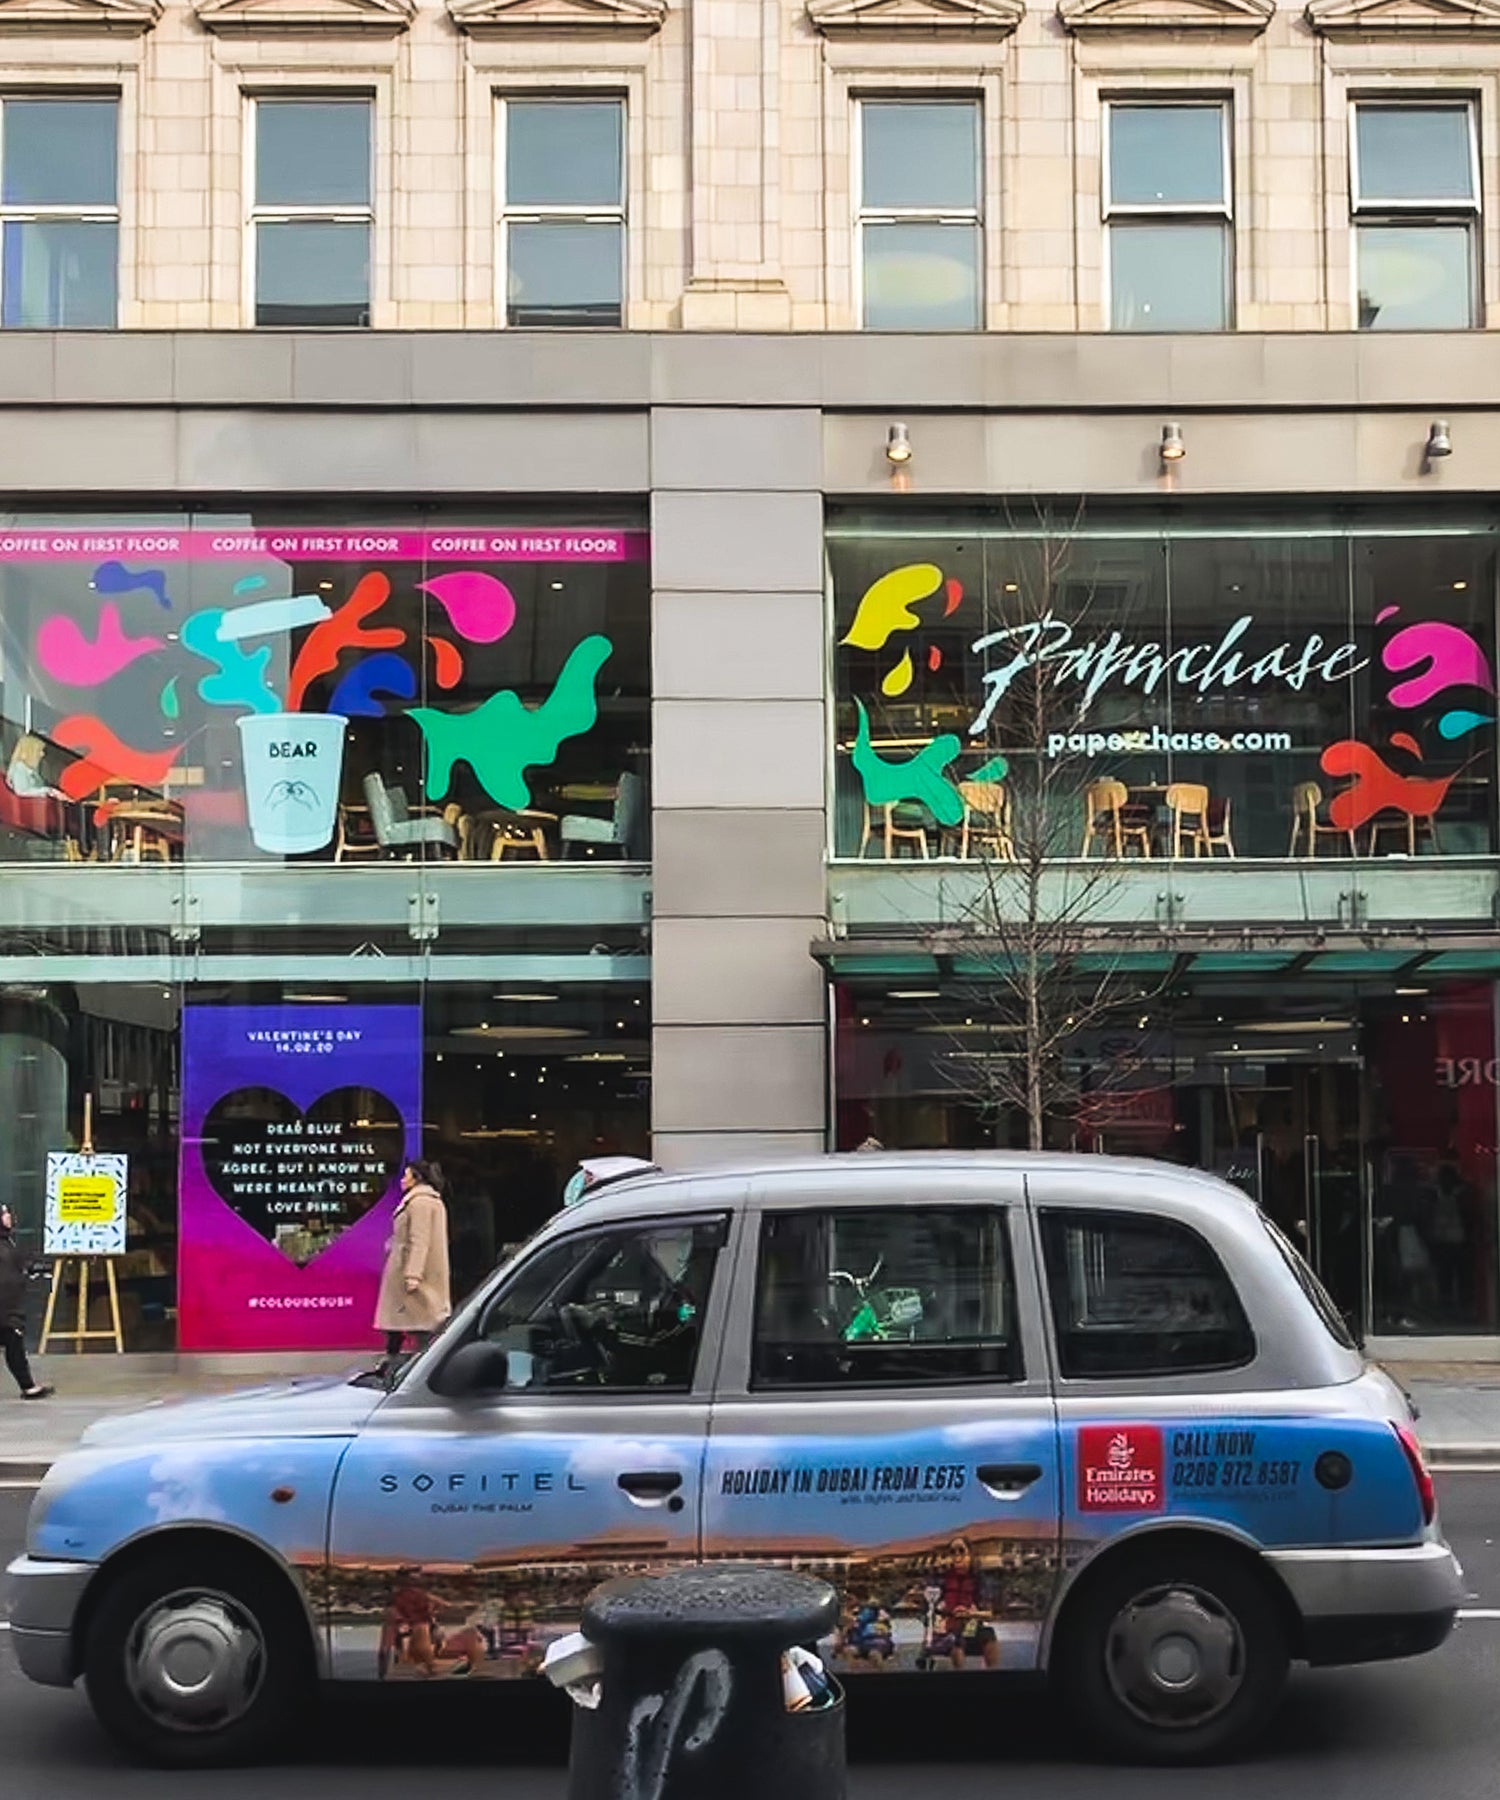 BEAR x Paperchase Pop-Up in Fitzrovia, London